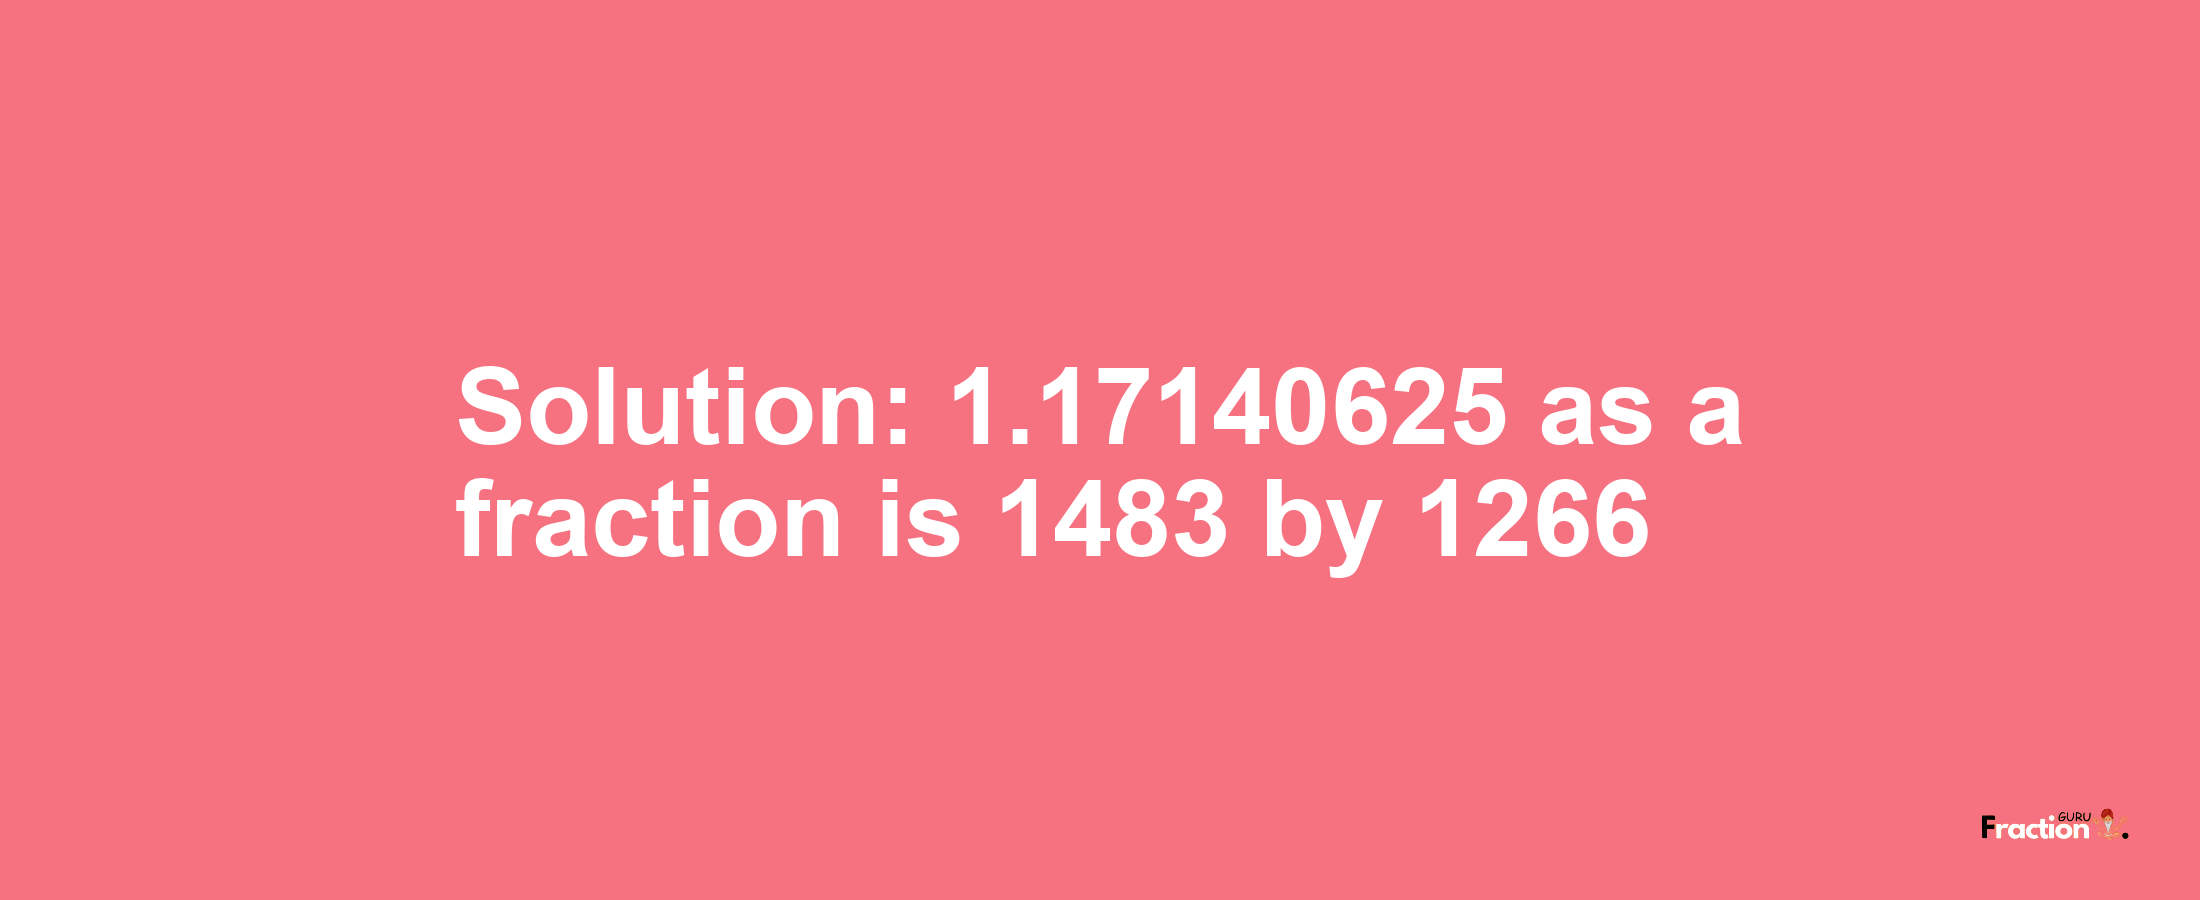 Solution:1.17140625 as a fraction is 1483/1266